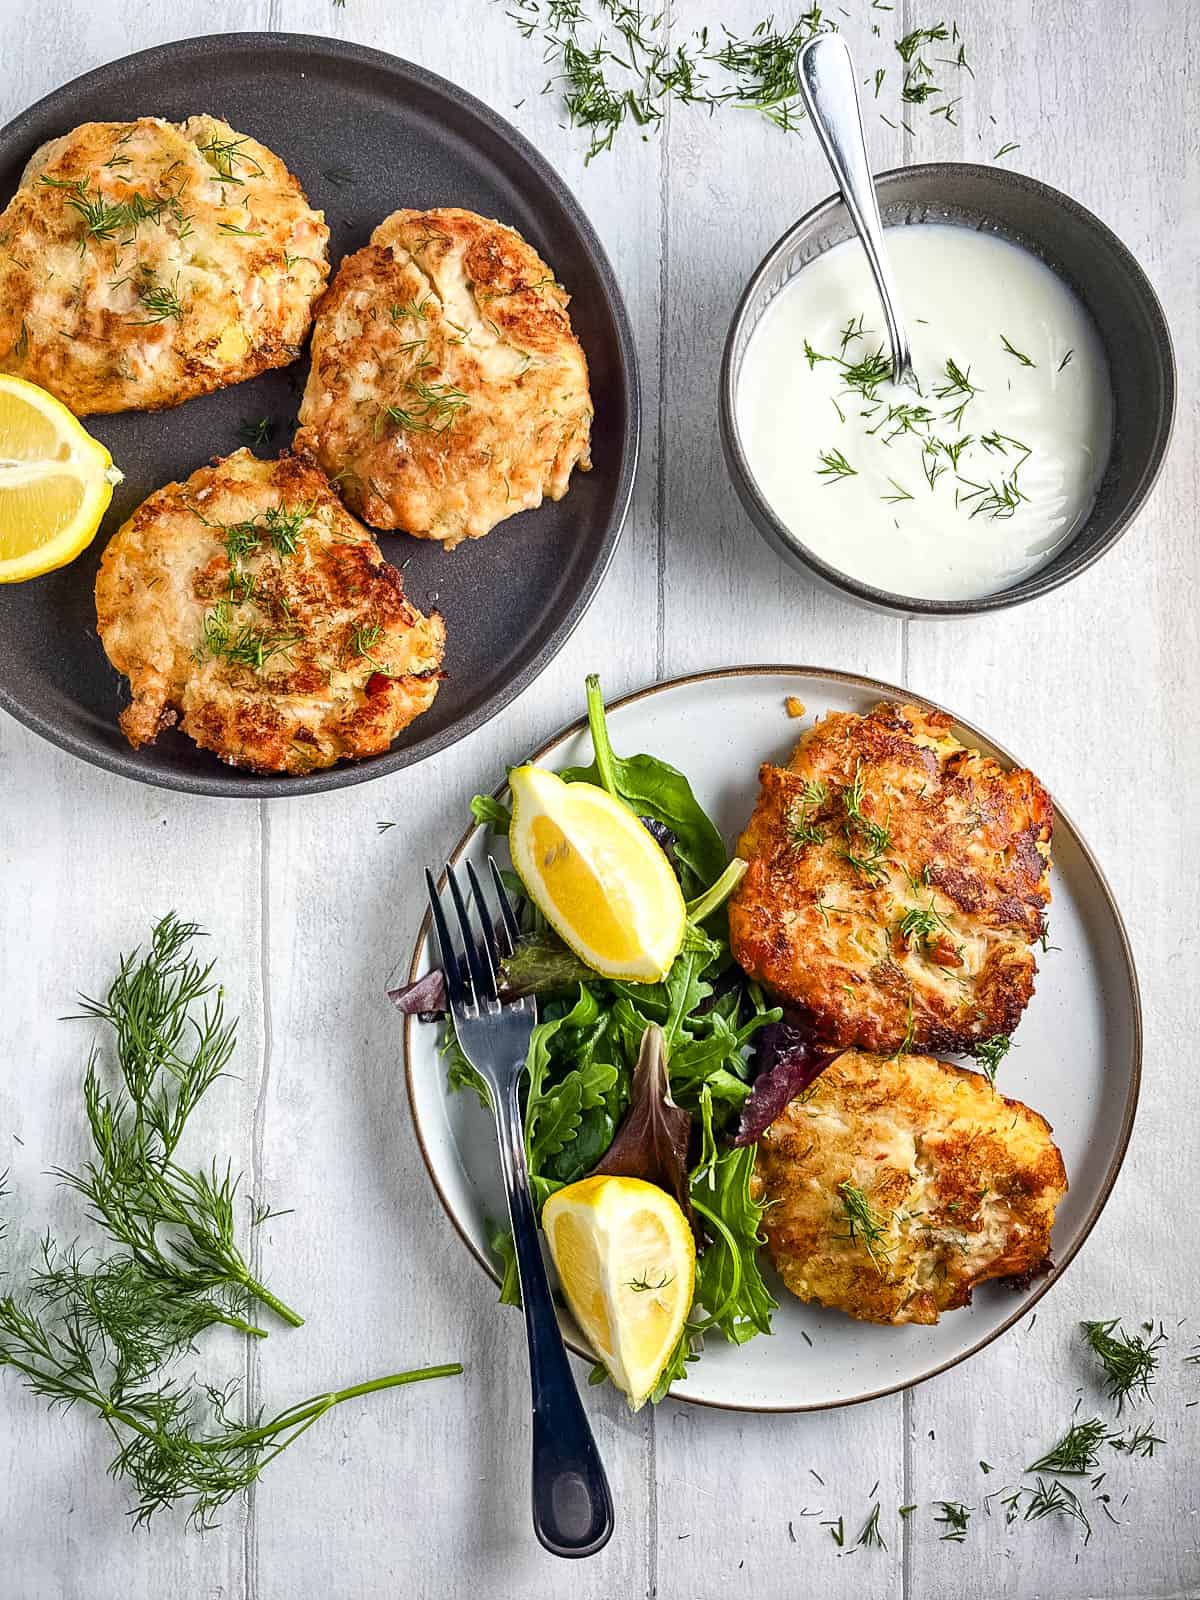 cokked salmon fishcakes on a plate with green salad and lemon wedges with a side of white sauce and plate of more fishcakes.